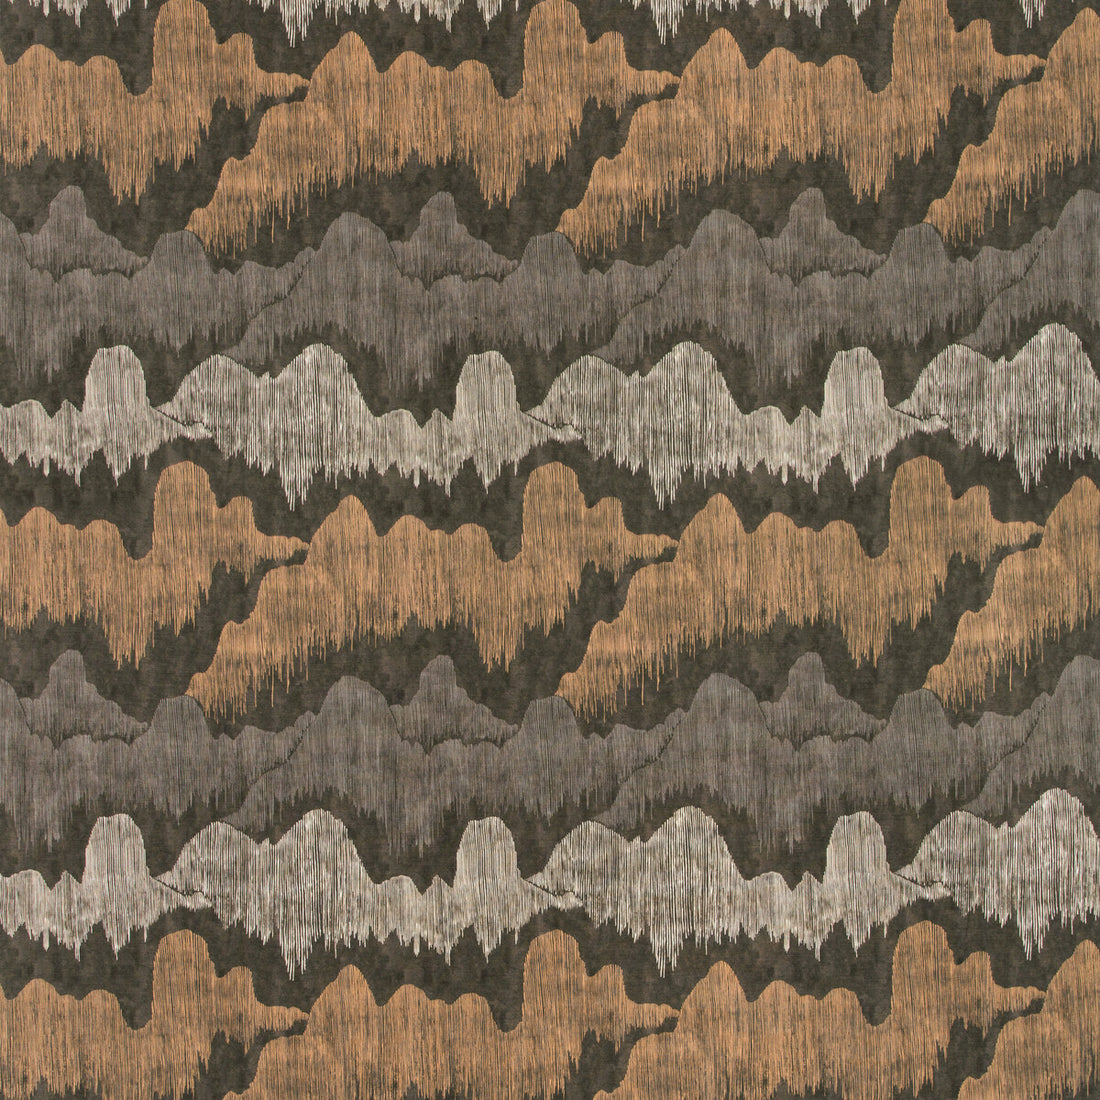 Cascadia fabric in noir color - pattern GWF-3755.811.0 - by Lee Jofa Modern in the Kelly Wearstler V collection